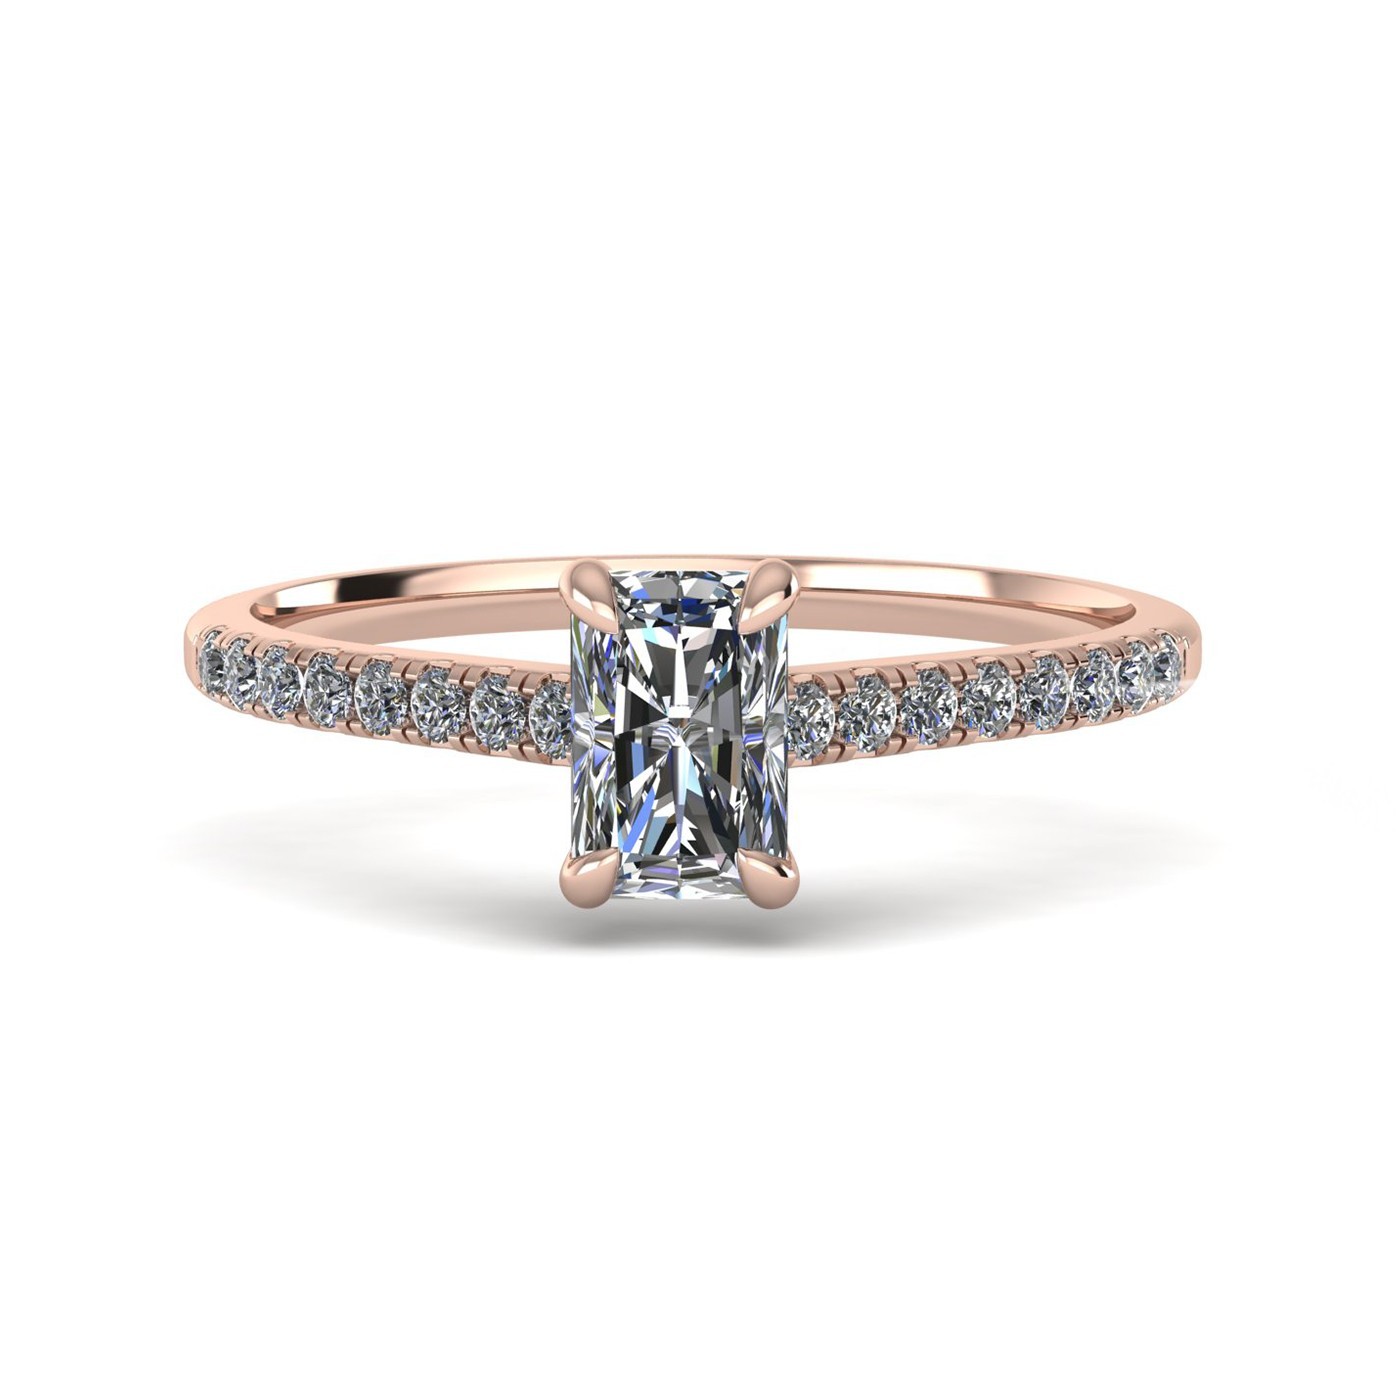 18k rose gold  1,50 ct 4 prongs radiant cut diamond engagement ring with whisper thin pavÉ set band Photos & images